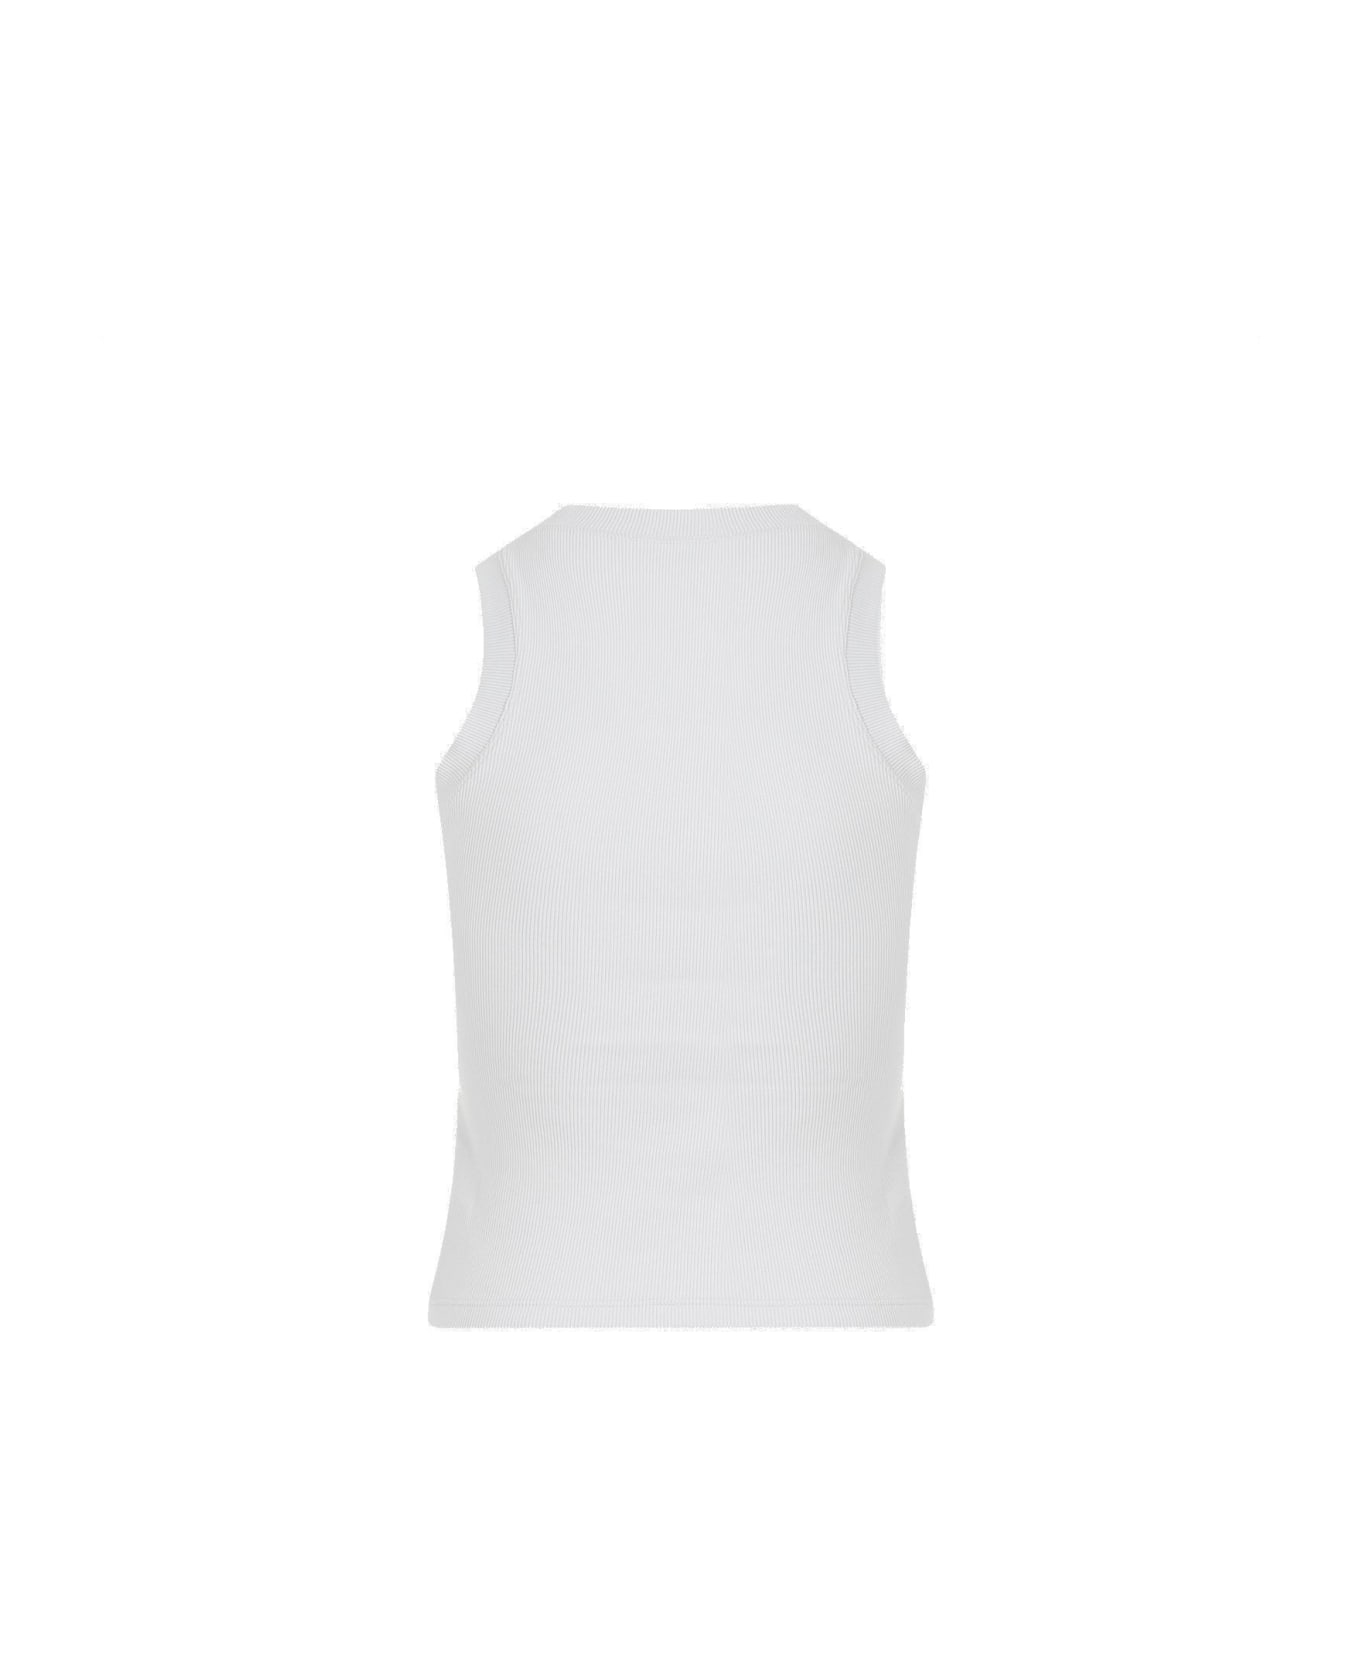 Off-White Logo Embroidered Sleeveless Top - ARTIC ICE ARTIC ICE タンクトップ